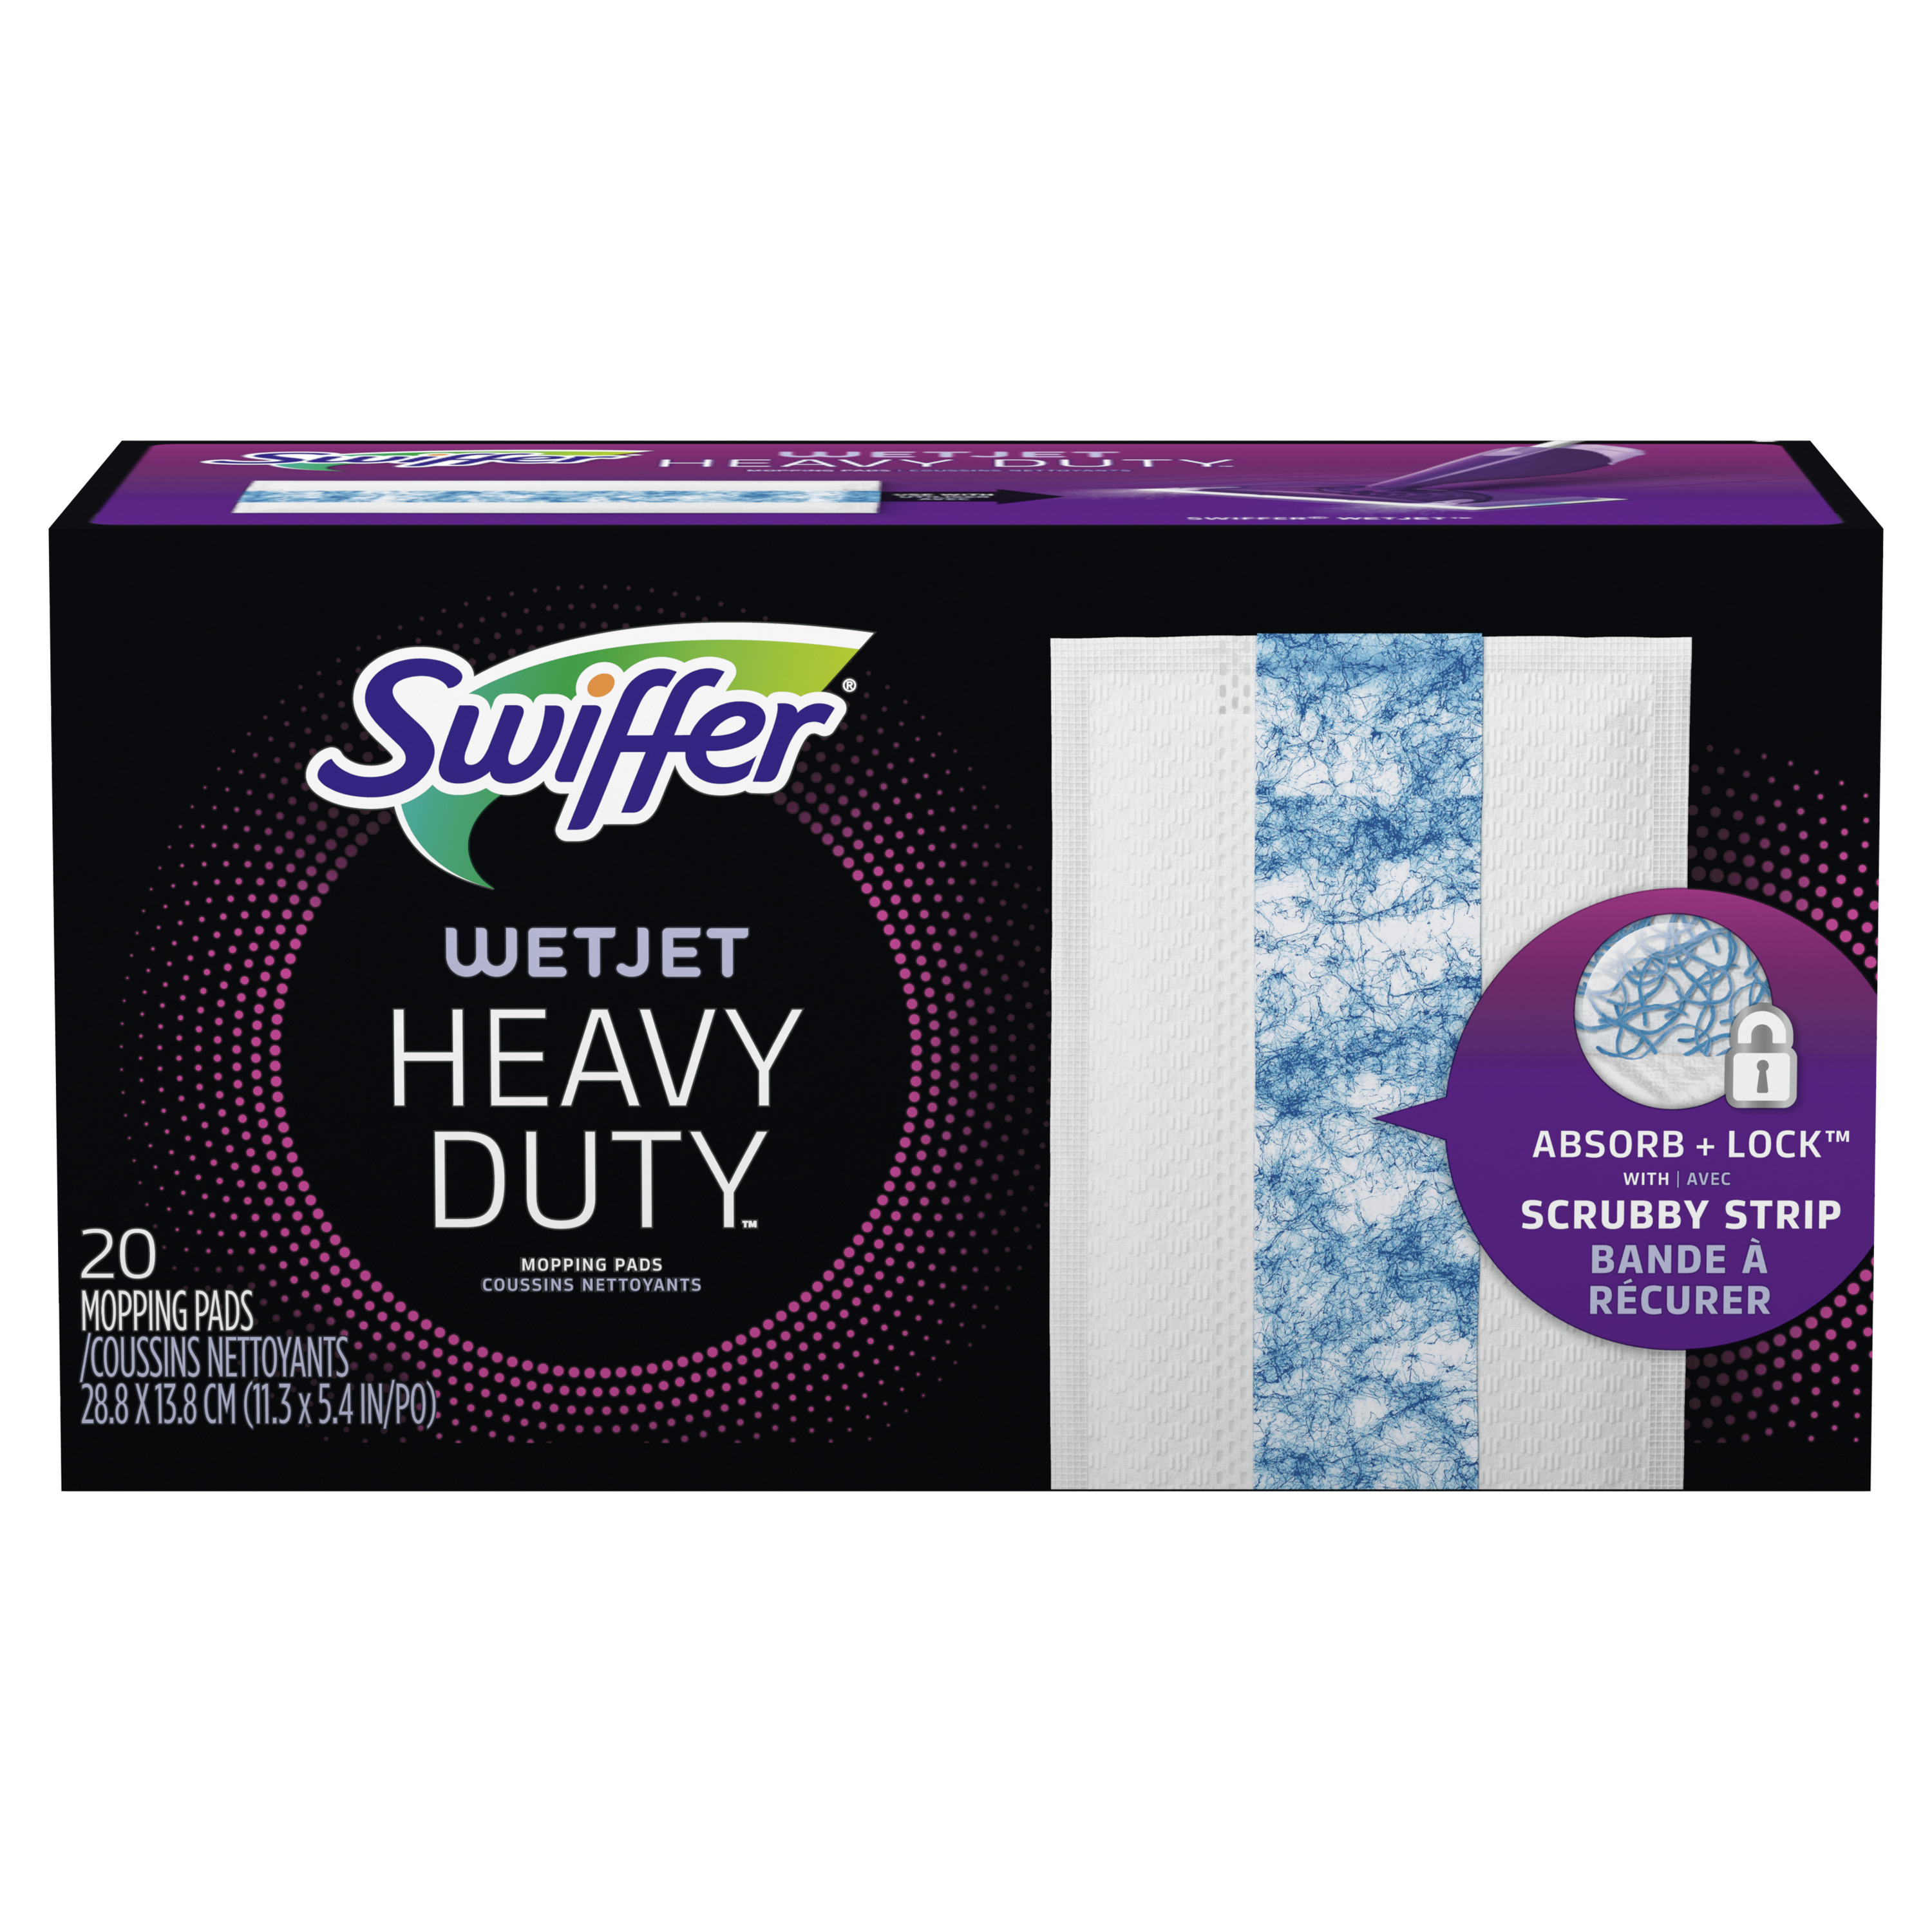 Swiffer WetJet Spray Mop Heavy Duty Mop Refills for Floor Mopping and Cleaning, All Purpose Multi-Surface Floor Cleaning Pads, 20 Count - image 3 of 10